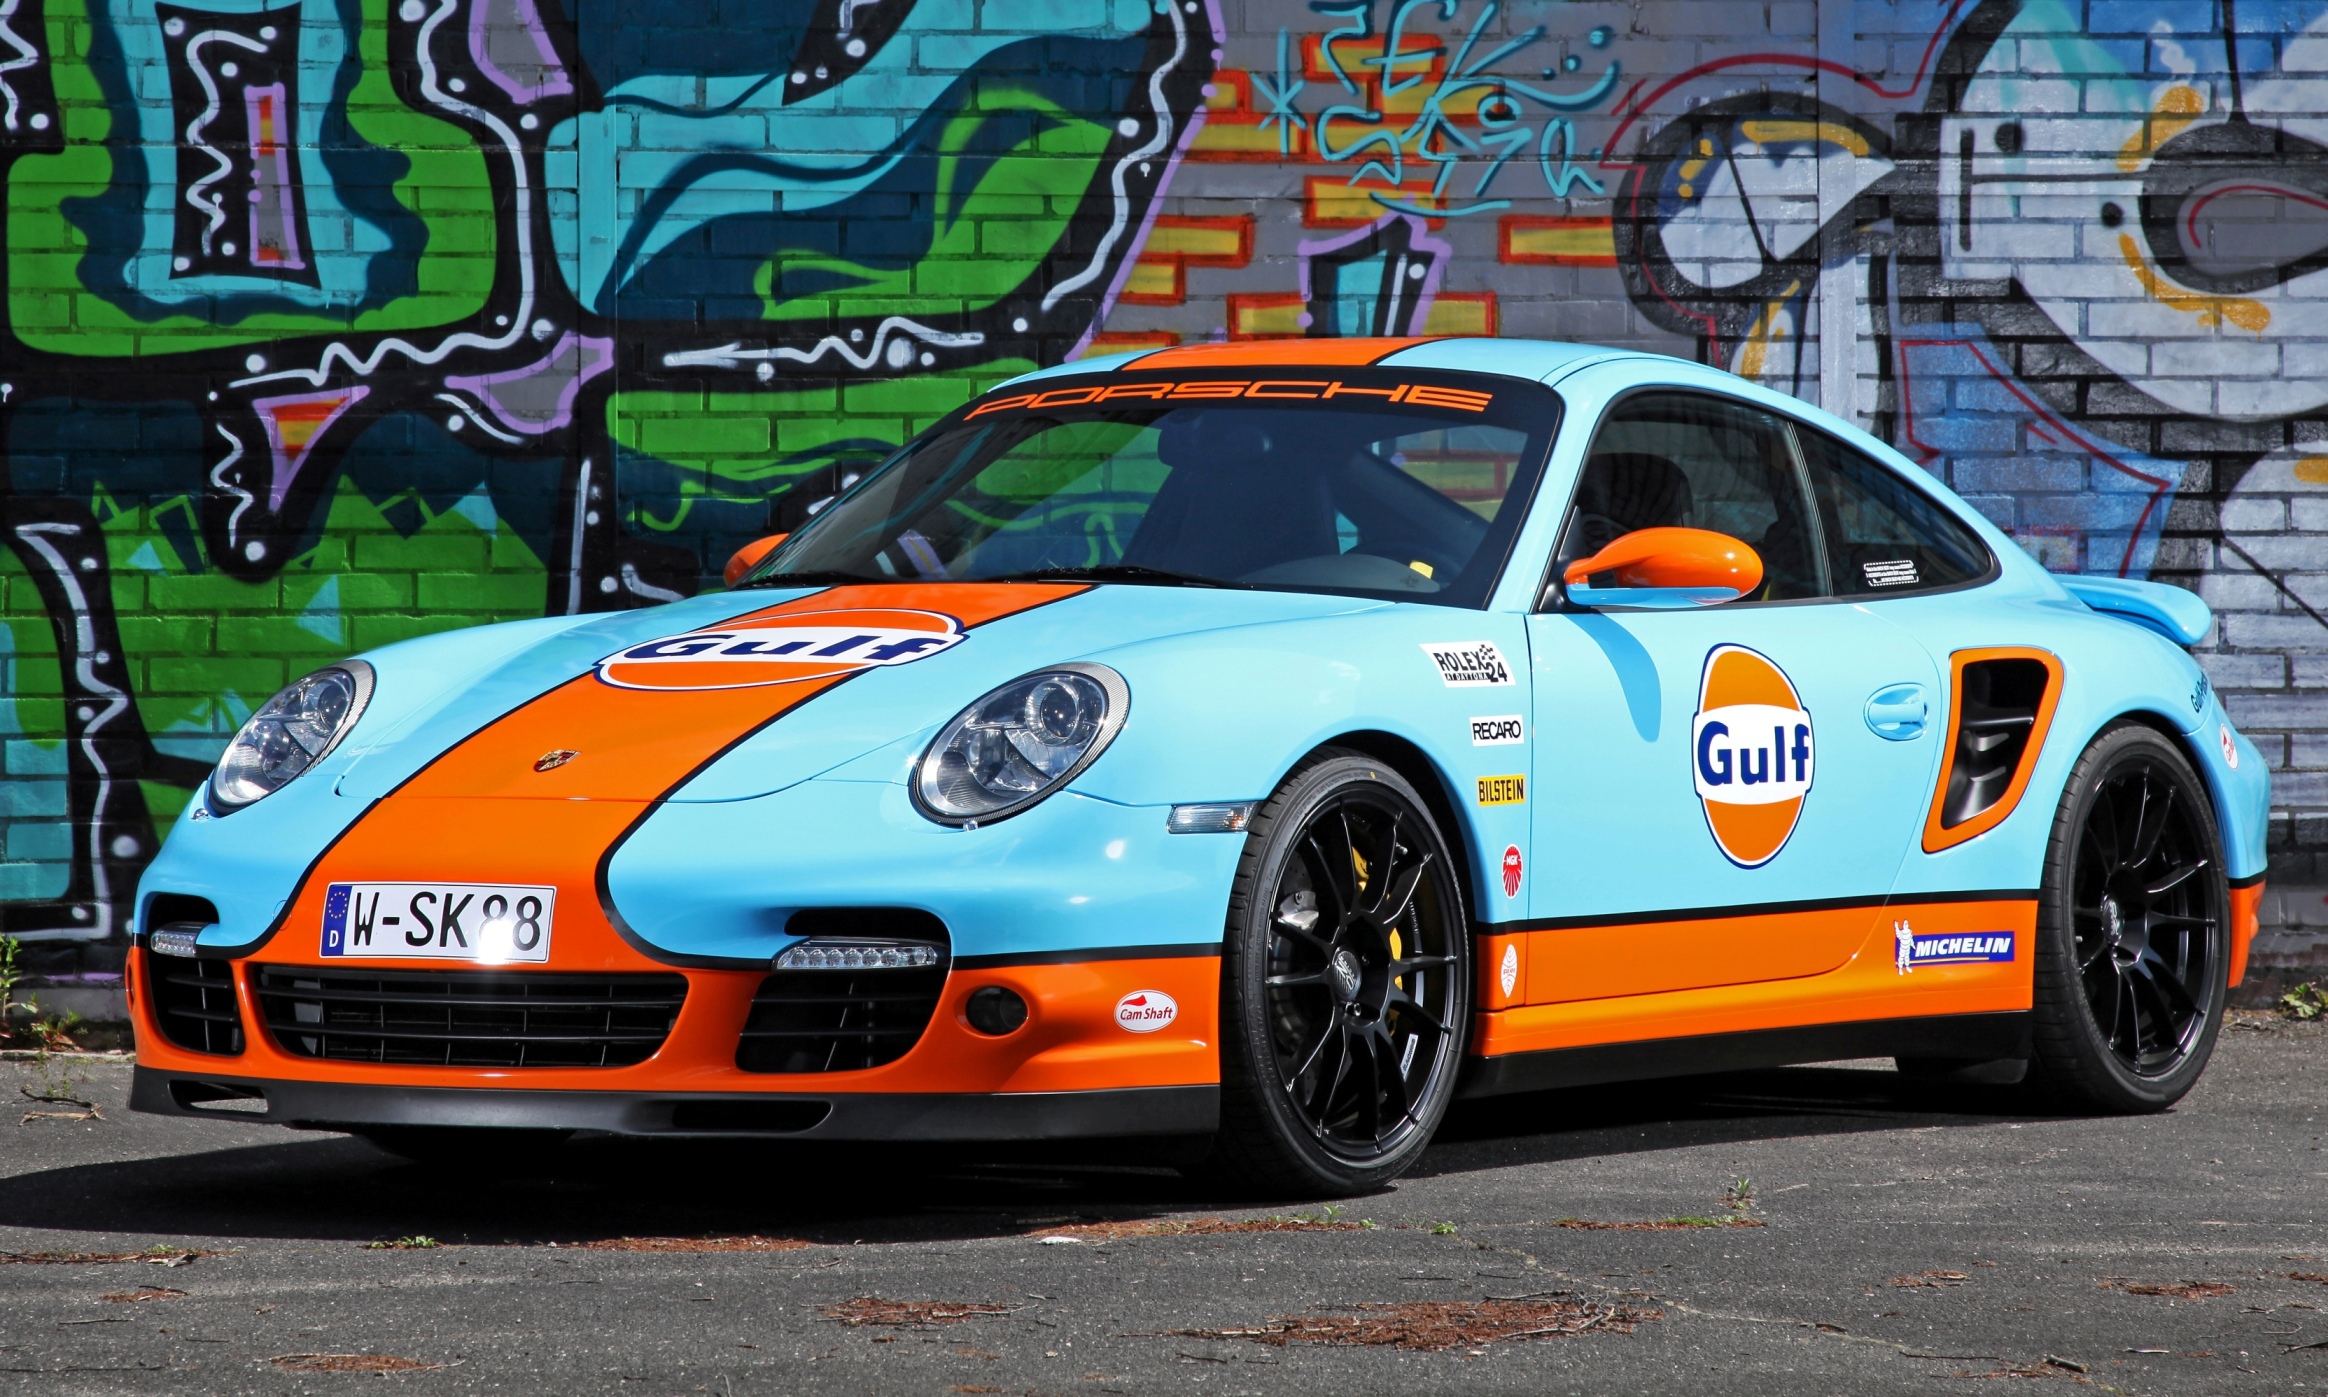 Gulf Racing Livery by CAM SHAFT for the Porsche 911 Turbo 10